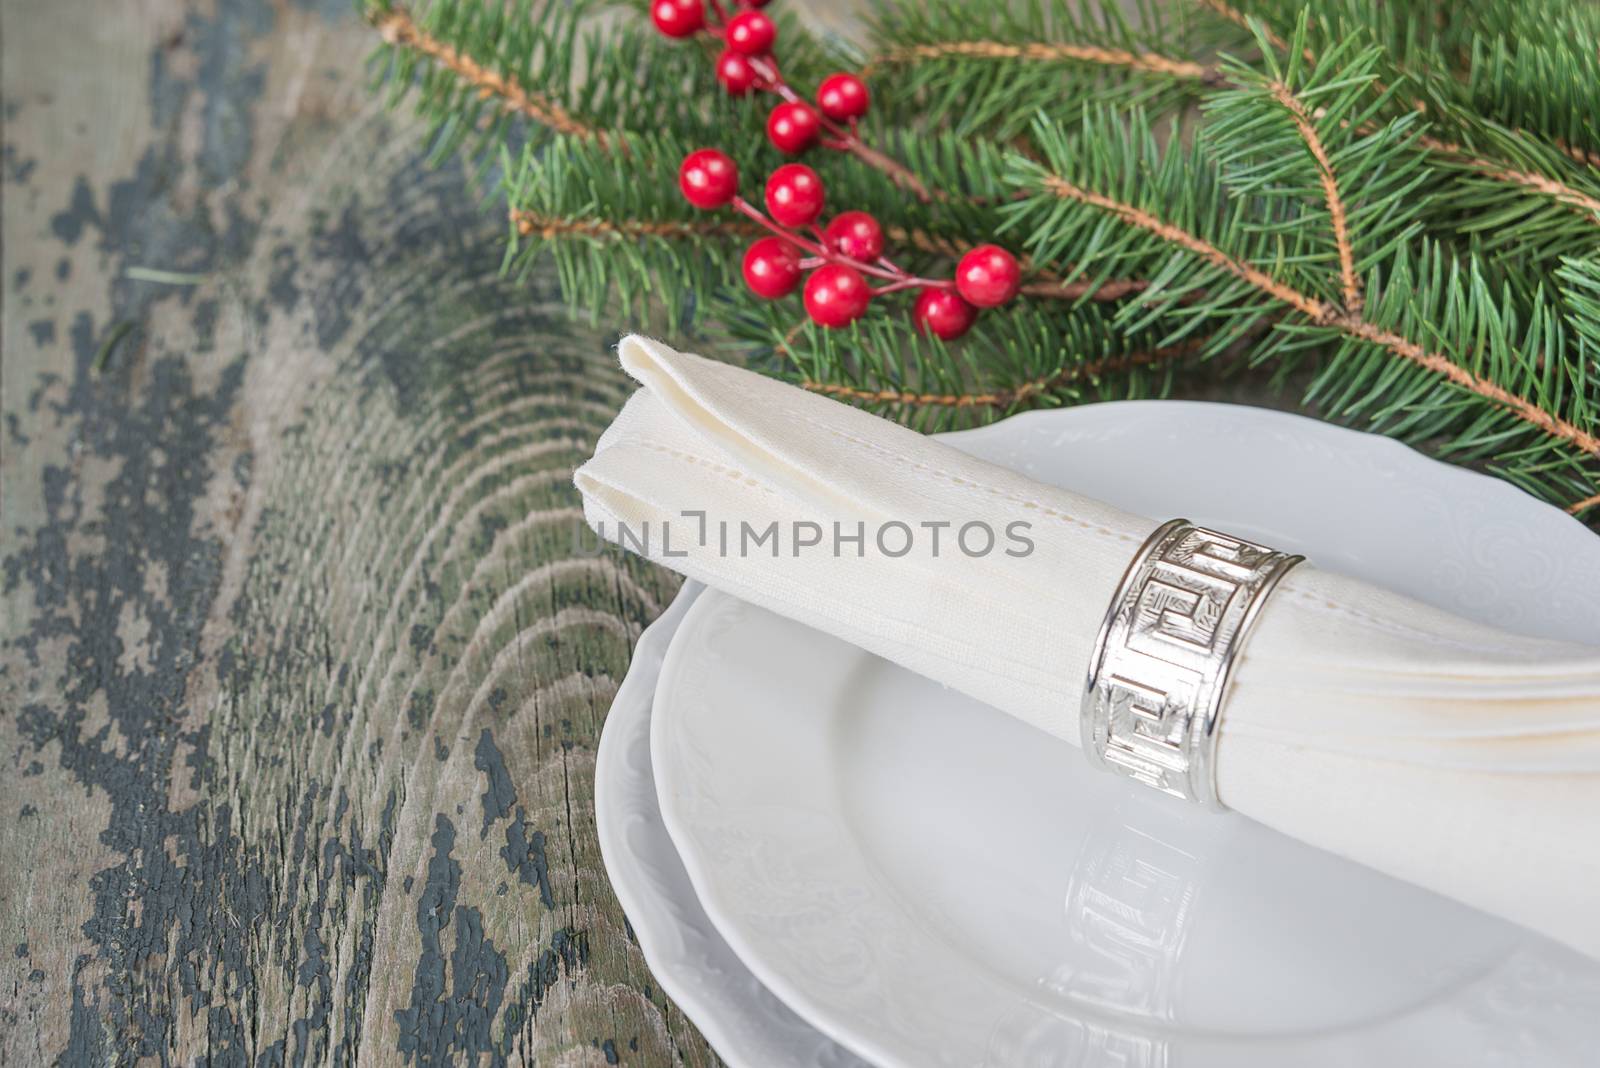 White linen napkin, silver napkin ring are on the white dinner plate, as well as red holly berries and green spruce branches which is located on a old wooden table, with space for text